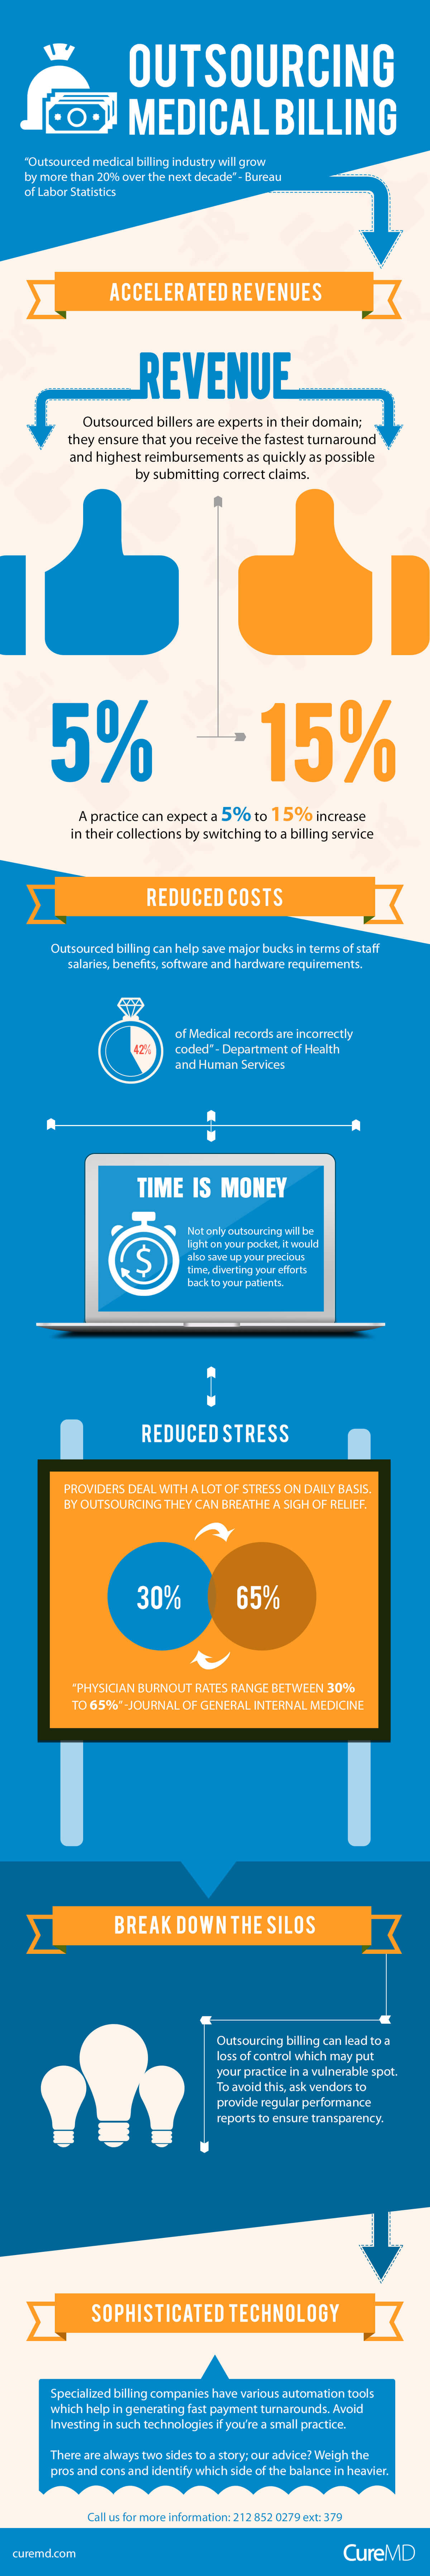 Outsource-Medical-Billing-infographic